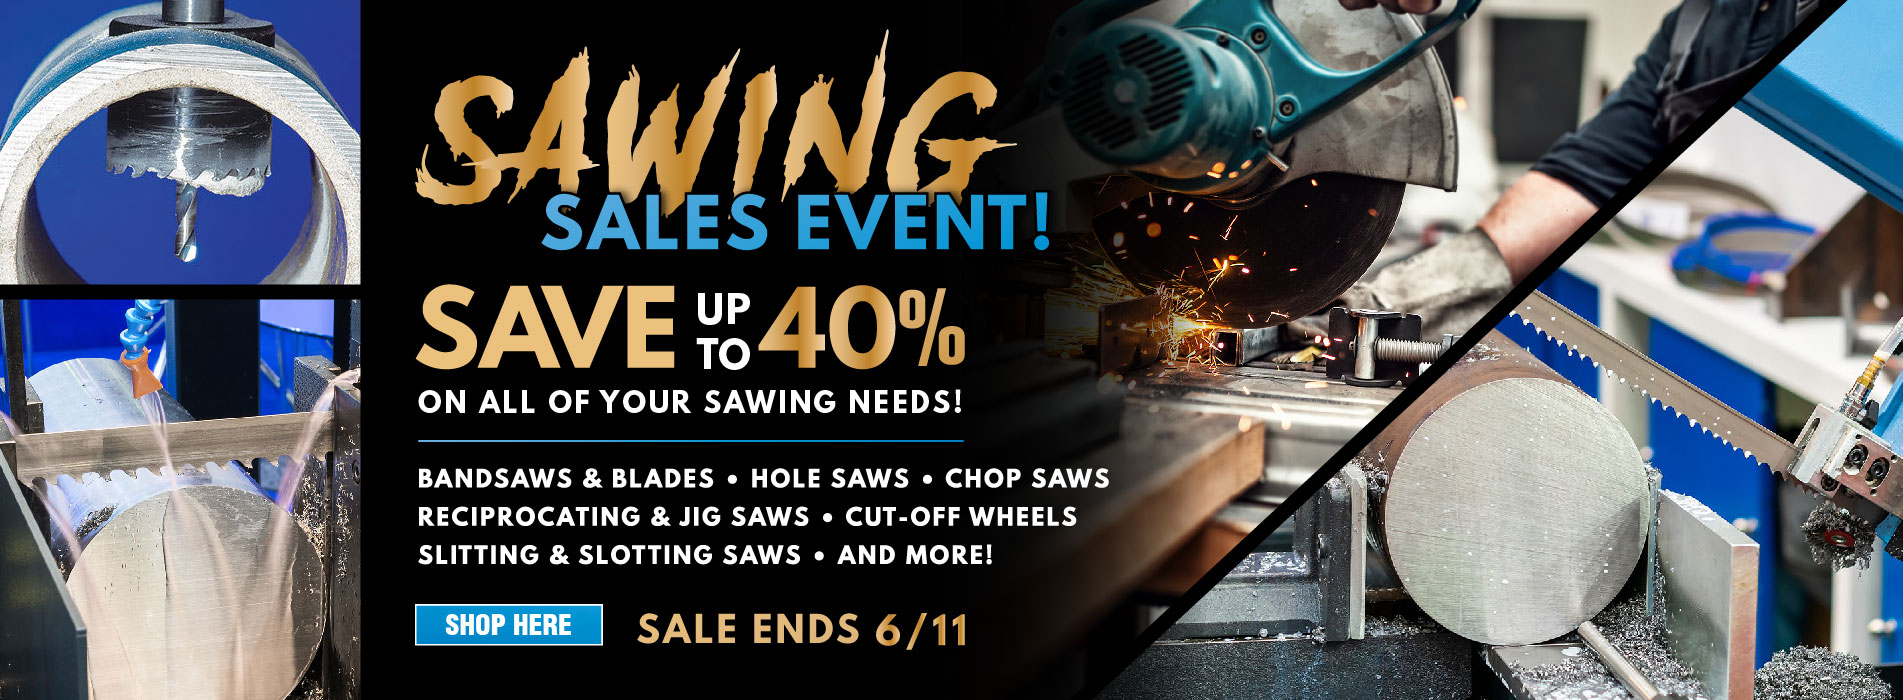 Don't cut up your budget! Sawing Sales Event Starts Now! Save on blades, bandsaws, chop saws, and more! 